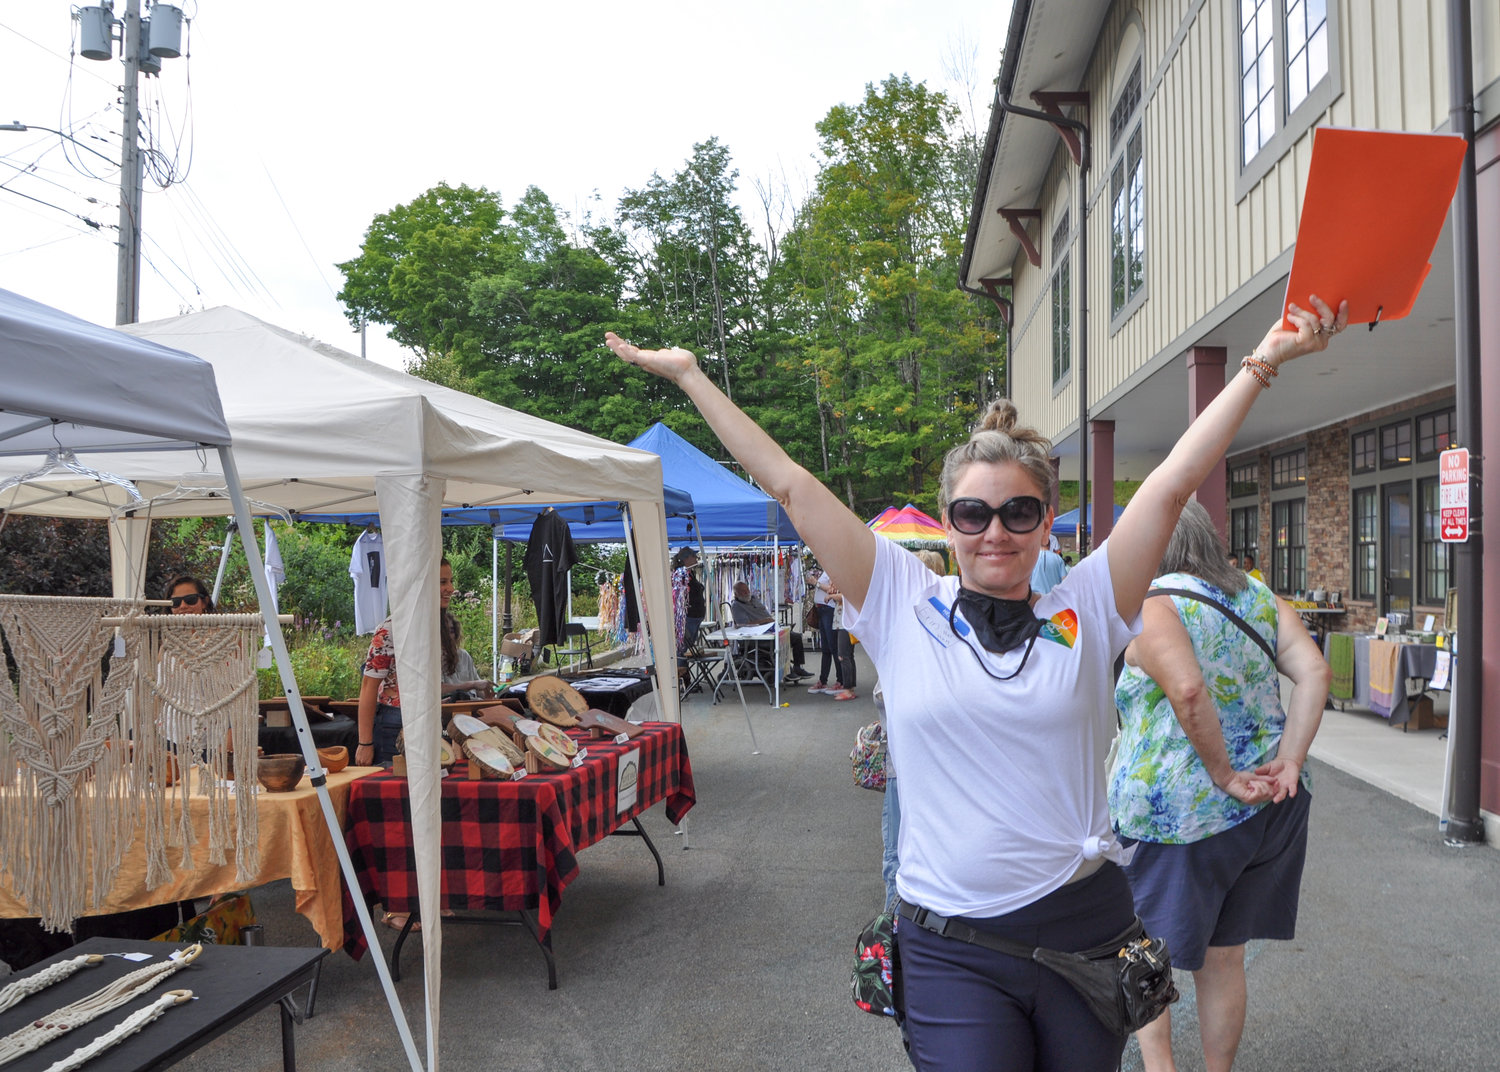 “What a day!” enthused Erin Dudley, executive director of the Hurleyville Performing Arts Centre (HPAC) following the town-wide Pride celebration last weekend.